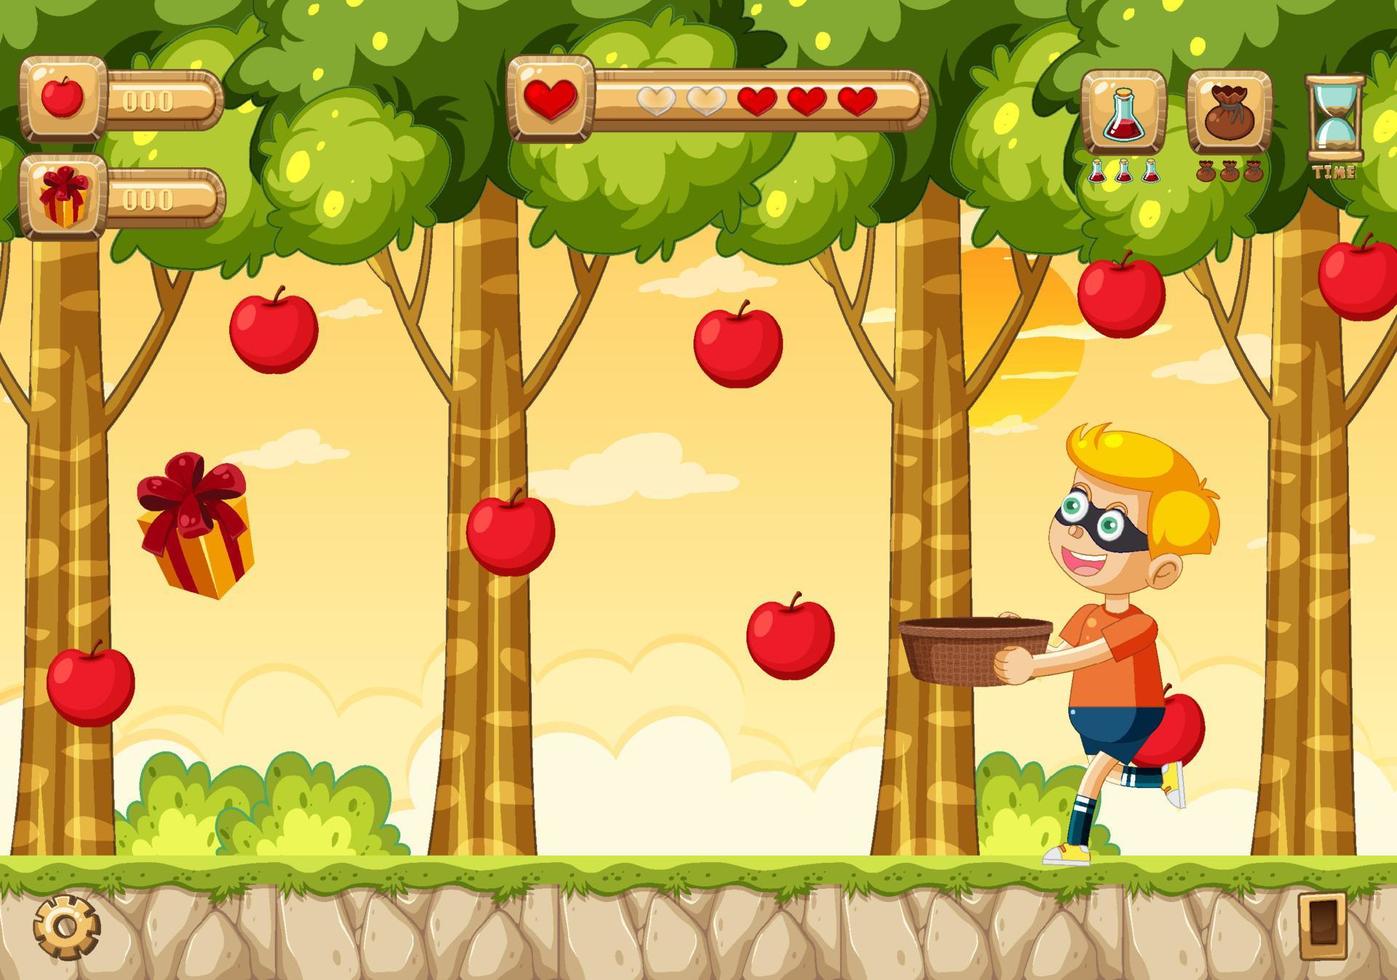 Collecting Apples Platformer Game Template vector